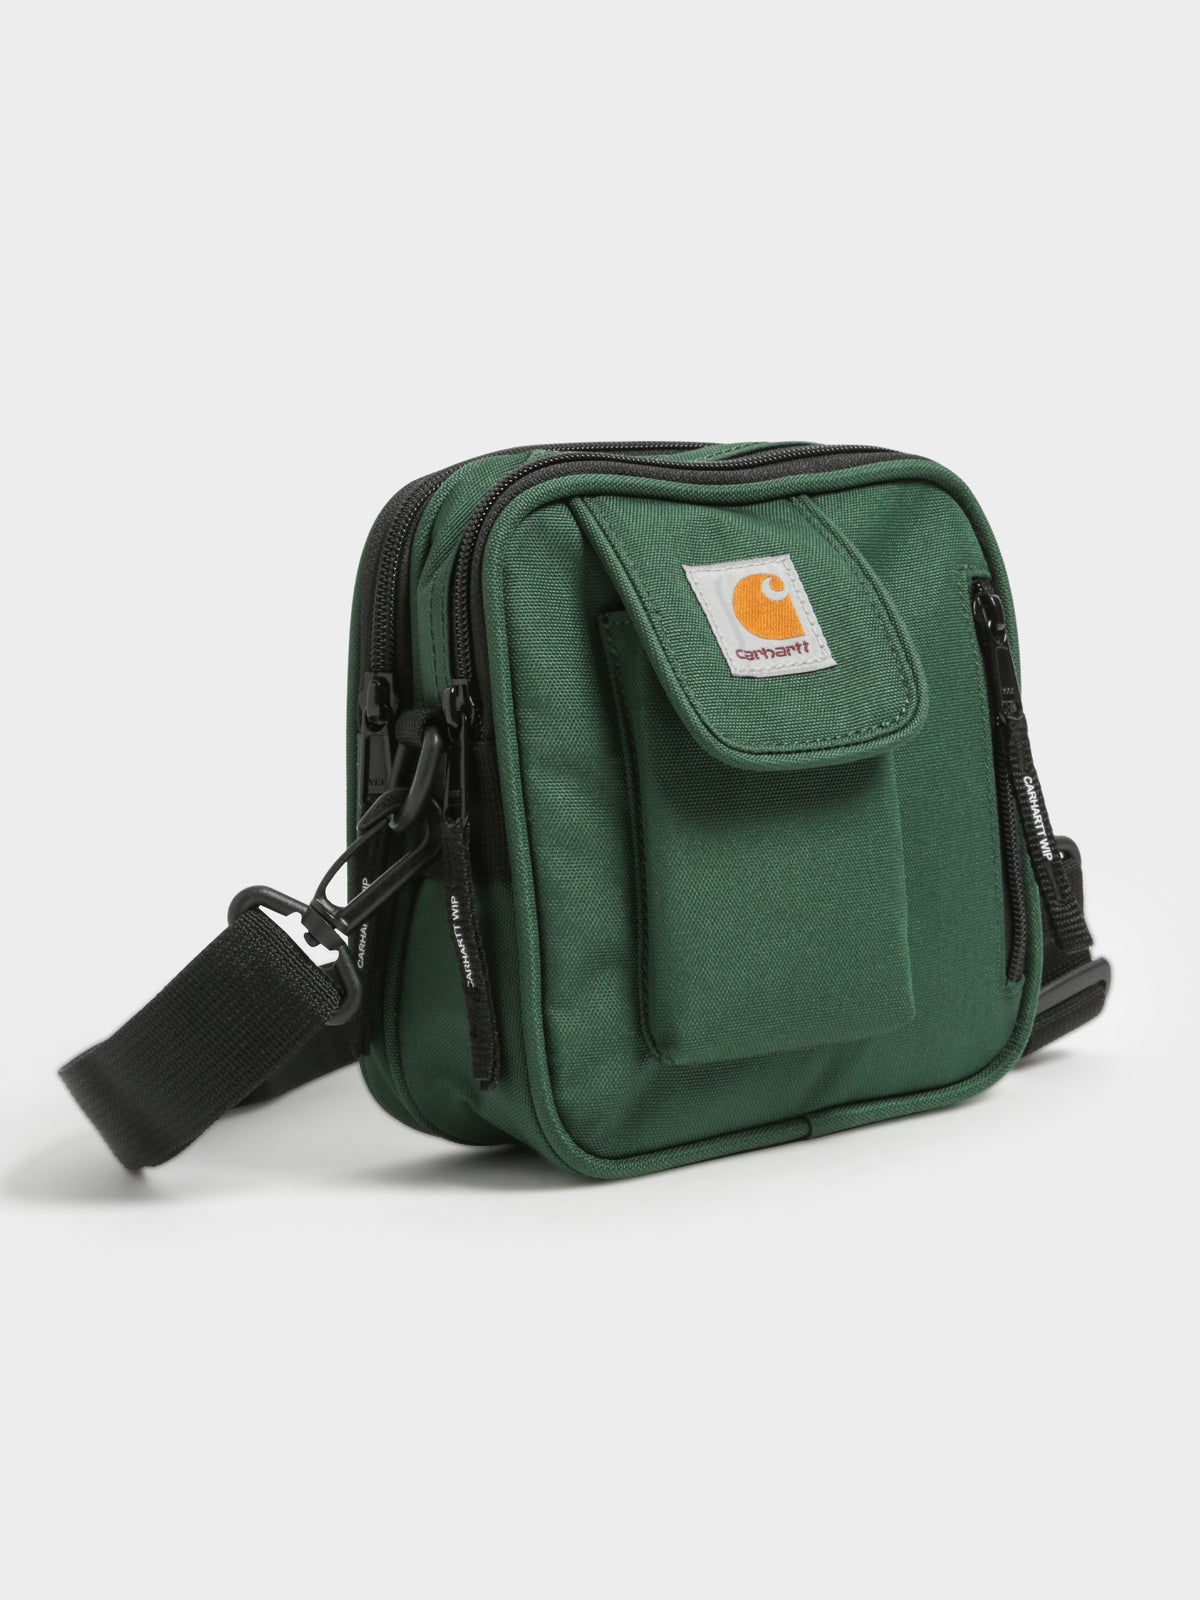 Essentials Bag in Treehouse Green